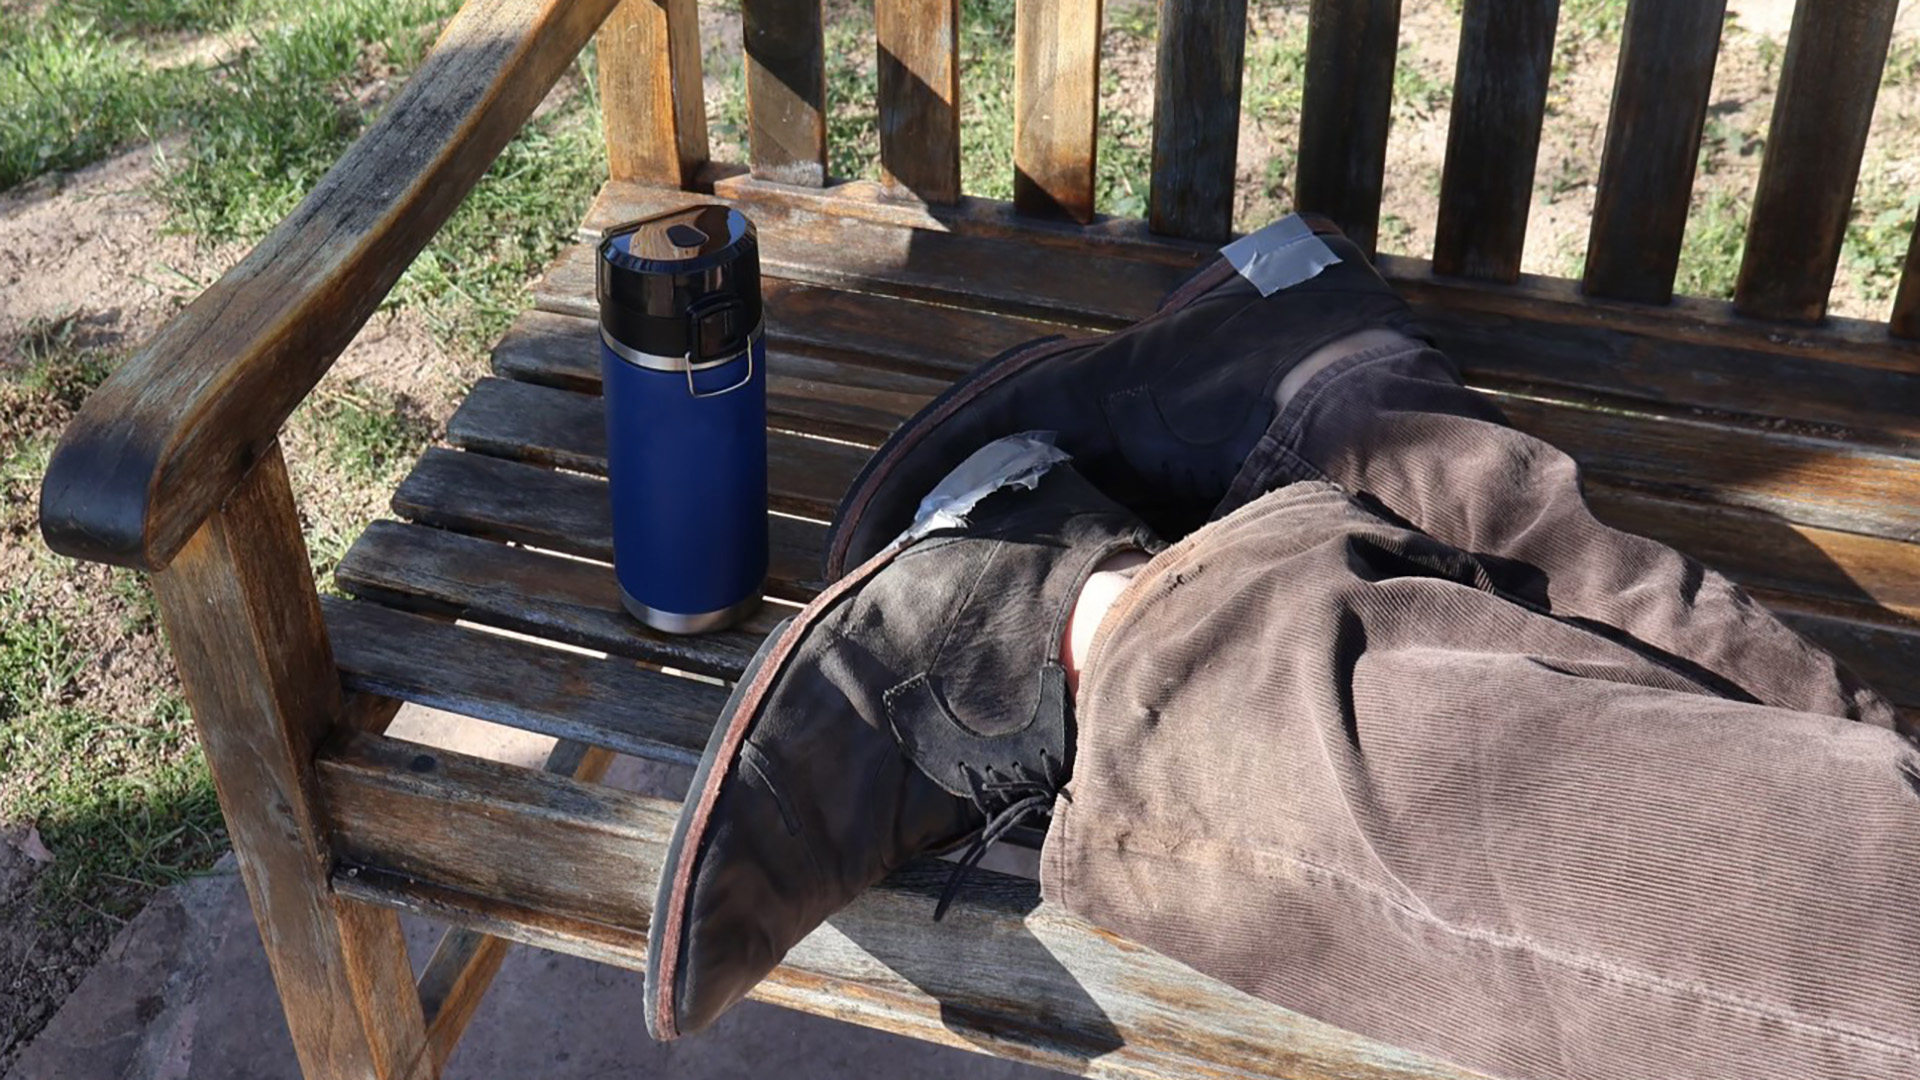 It's Saturday bench, Thermos